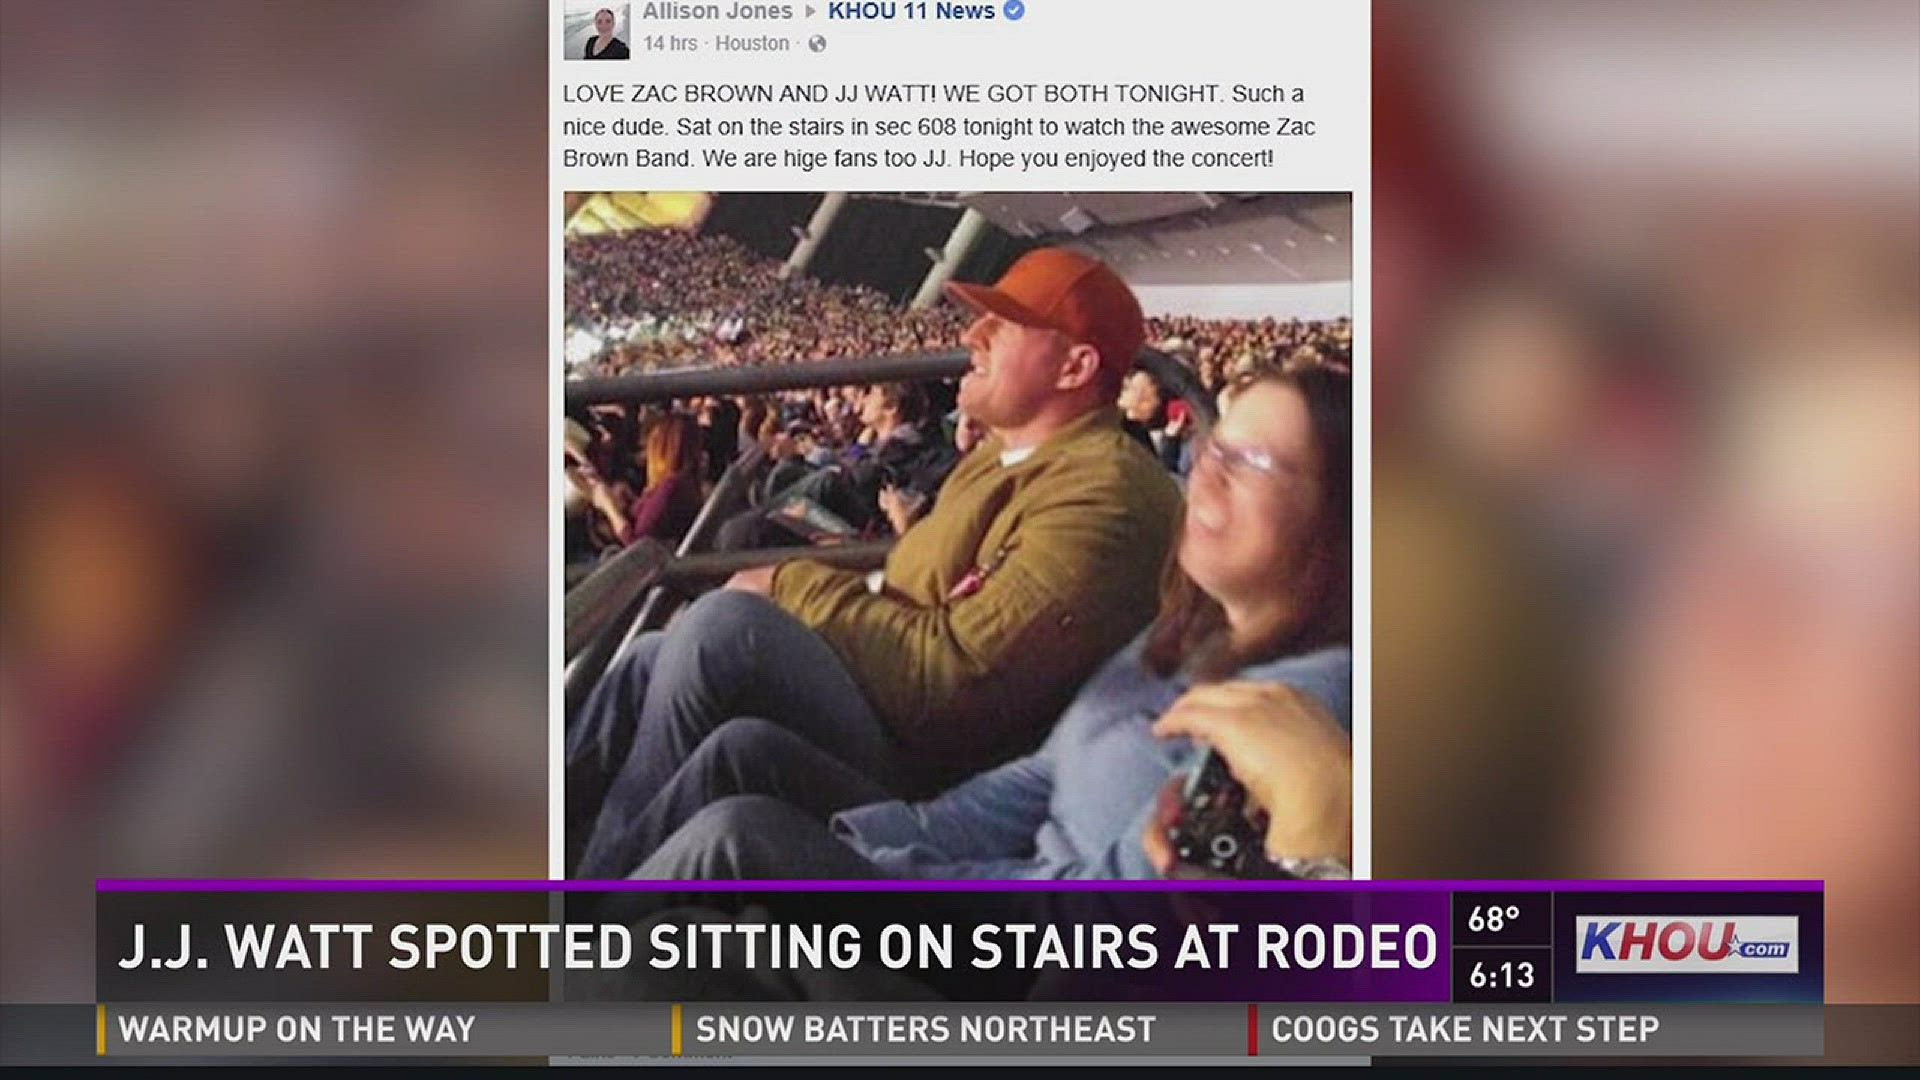 Houston Texans star J.J. Watt was spotted watching Zac Brown Band Monday night at RodeoHouston in the upper deck.